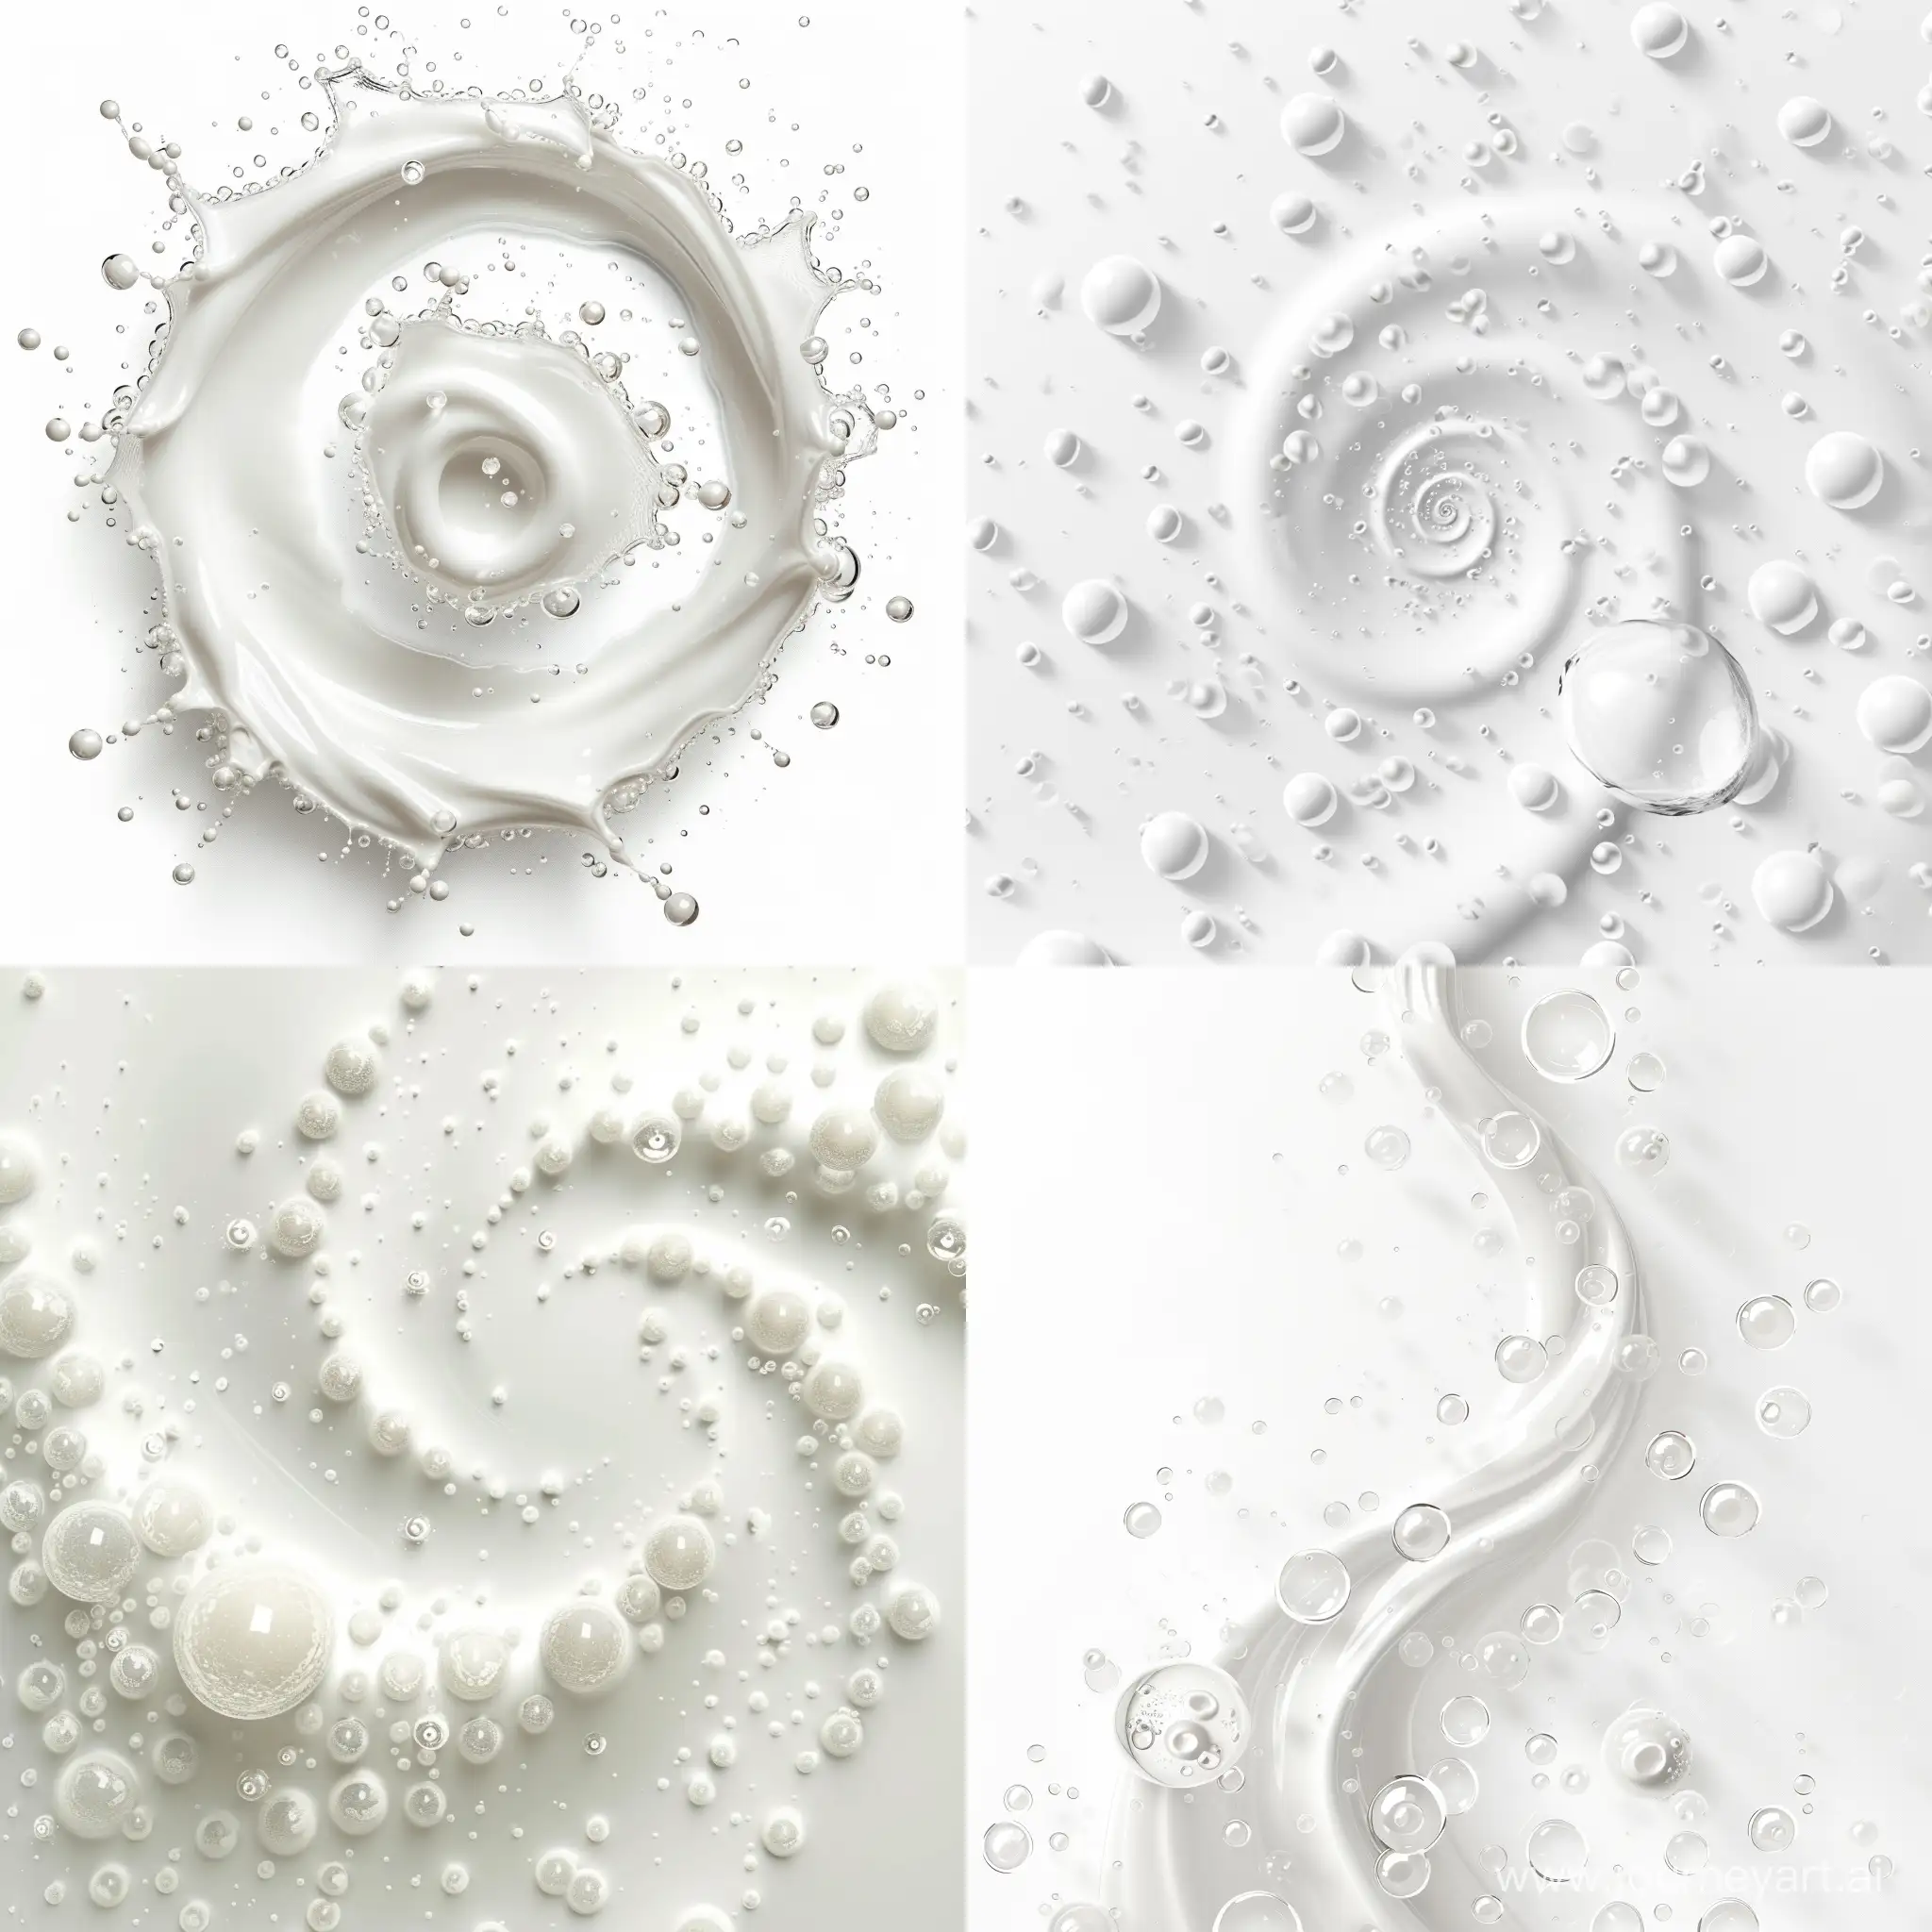 Ethereal-Swirling-White-Bubbles-Abstract-Minimalist-Art